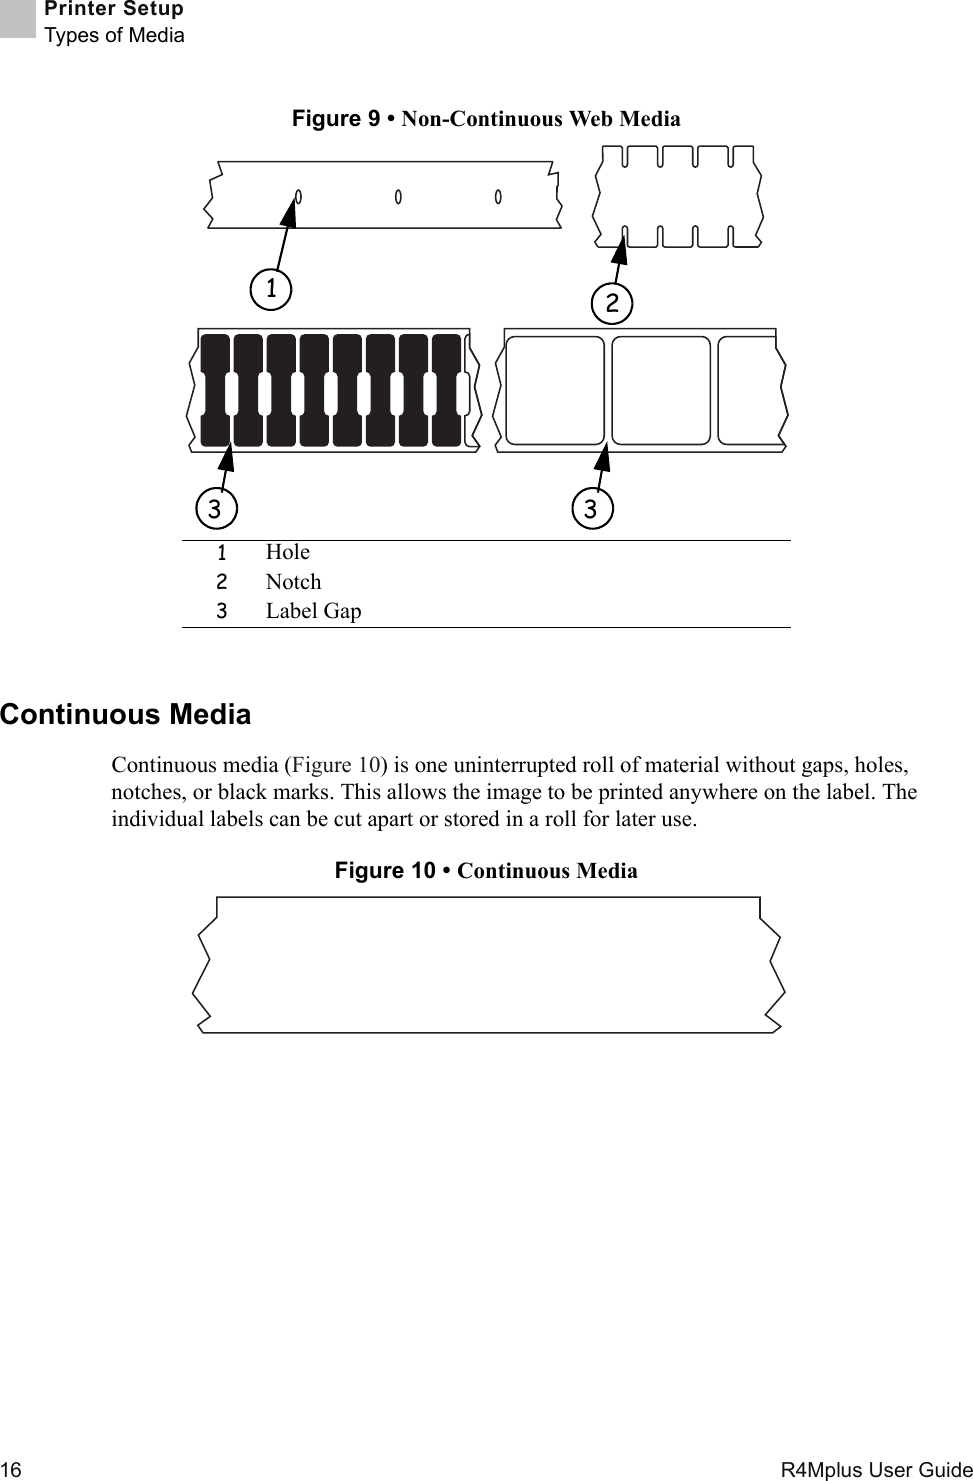 16   R4Mplus User GuidePrinter SetupTypes of MediaFigure 9 • Non-Continuous Web MediaContinuous MediaContinuous media (Figure 10) is one uninterrupted roll of material without gaps, holes, notches, or black marks. This allows the image to be printed anywhere on the label. The individual labels can be cut apart or stored in a roll for later use.Figure 10 • Continuous Media1Hole2Notch3Label Gap13 32